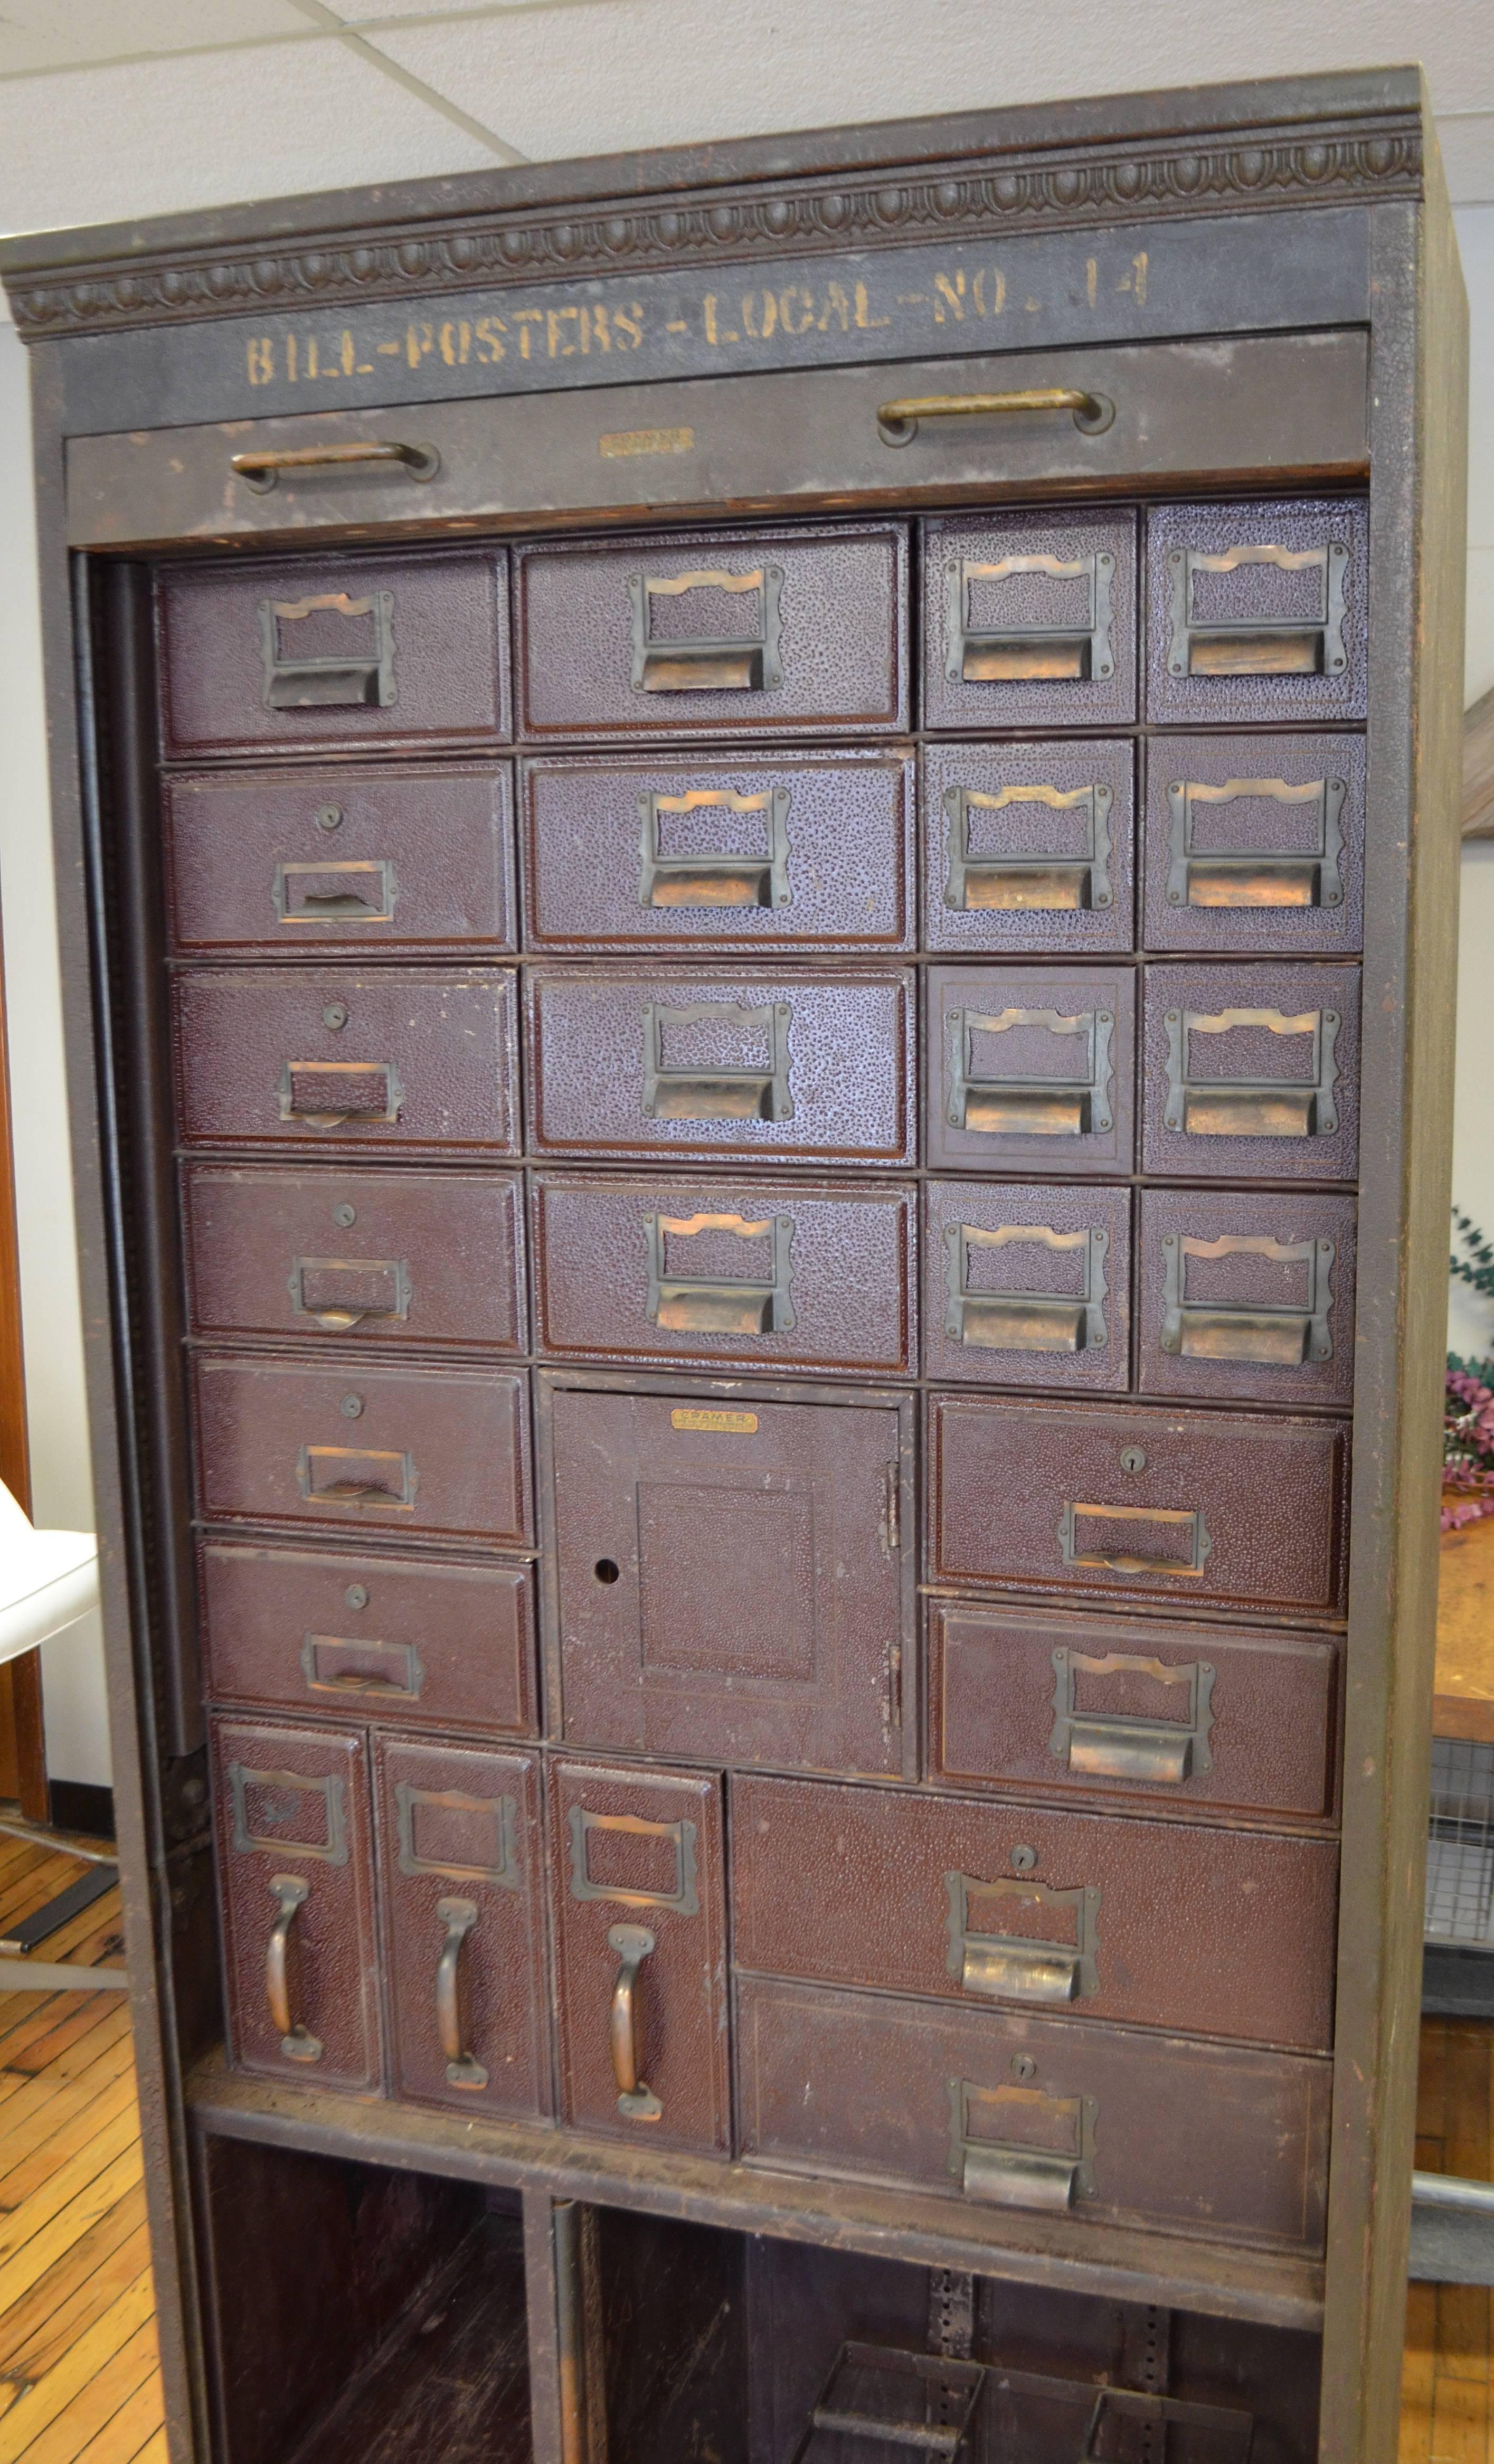 Industrial Storage Steel Unit File Cabinet circa 1930s from Midwestern Post Office